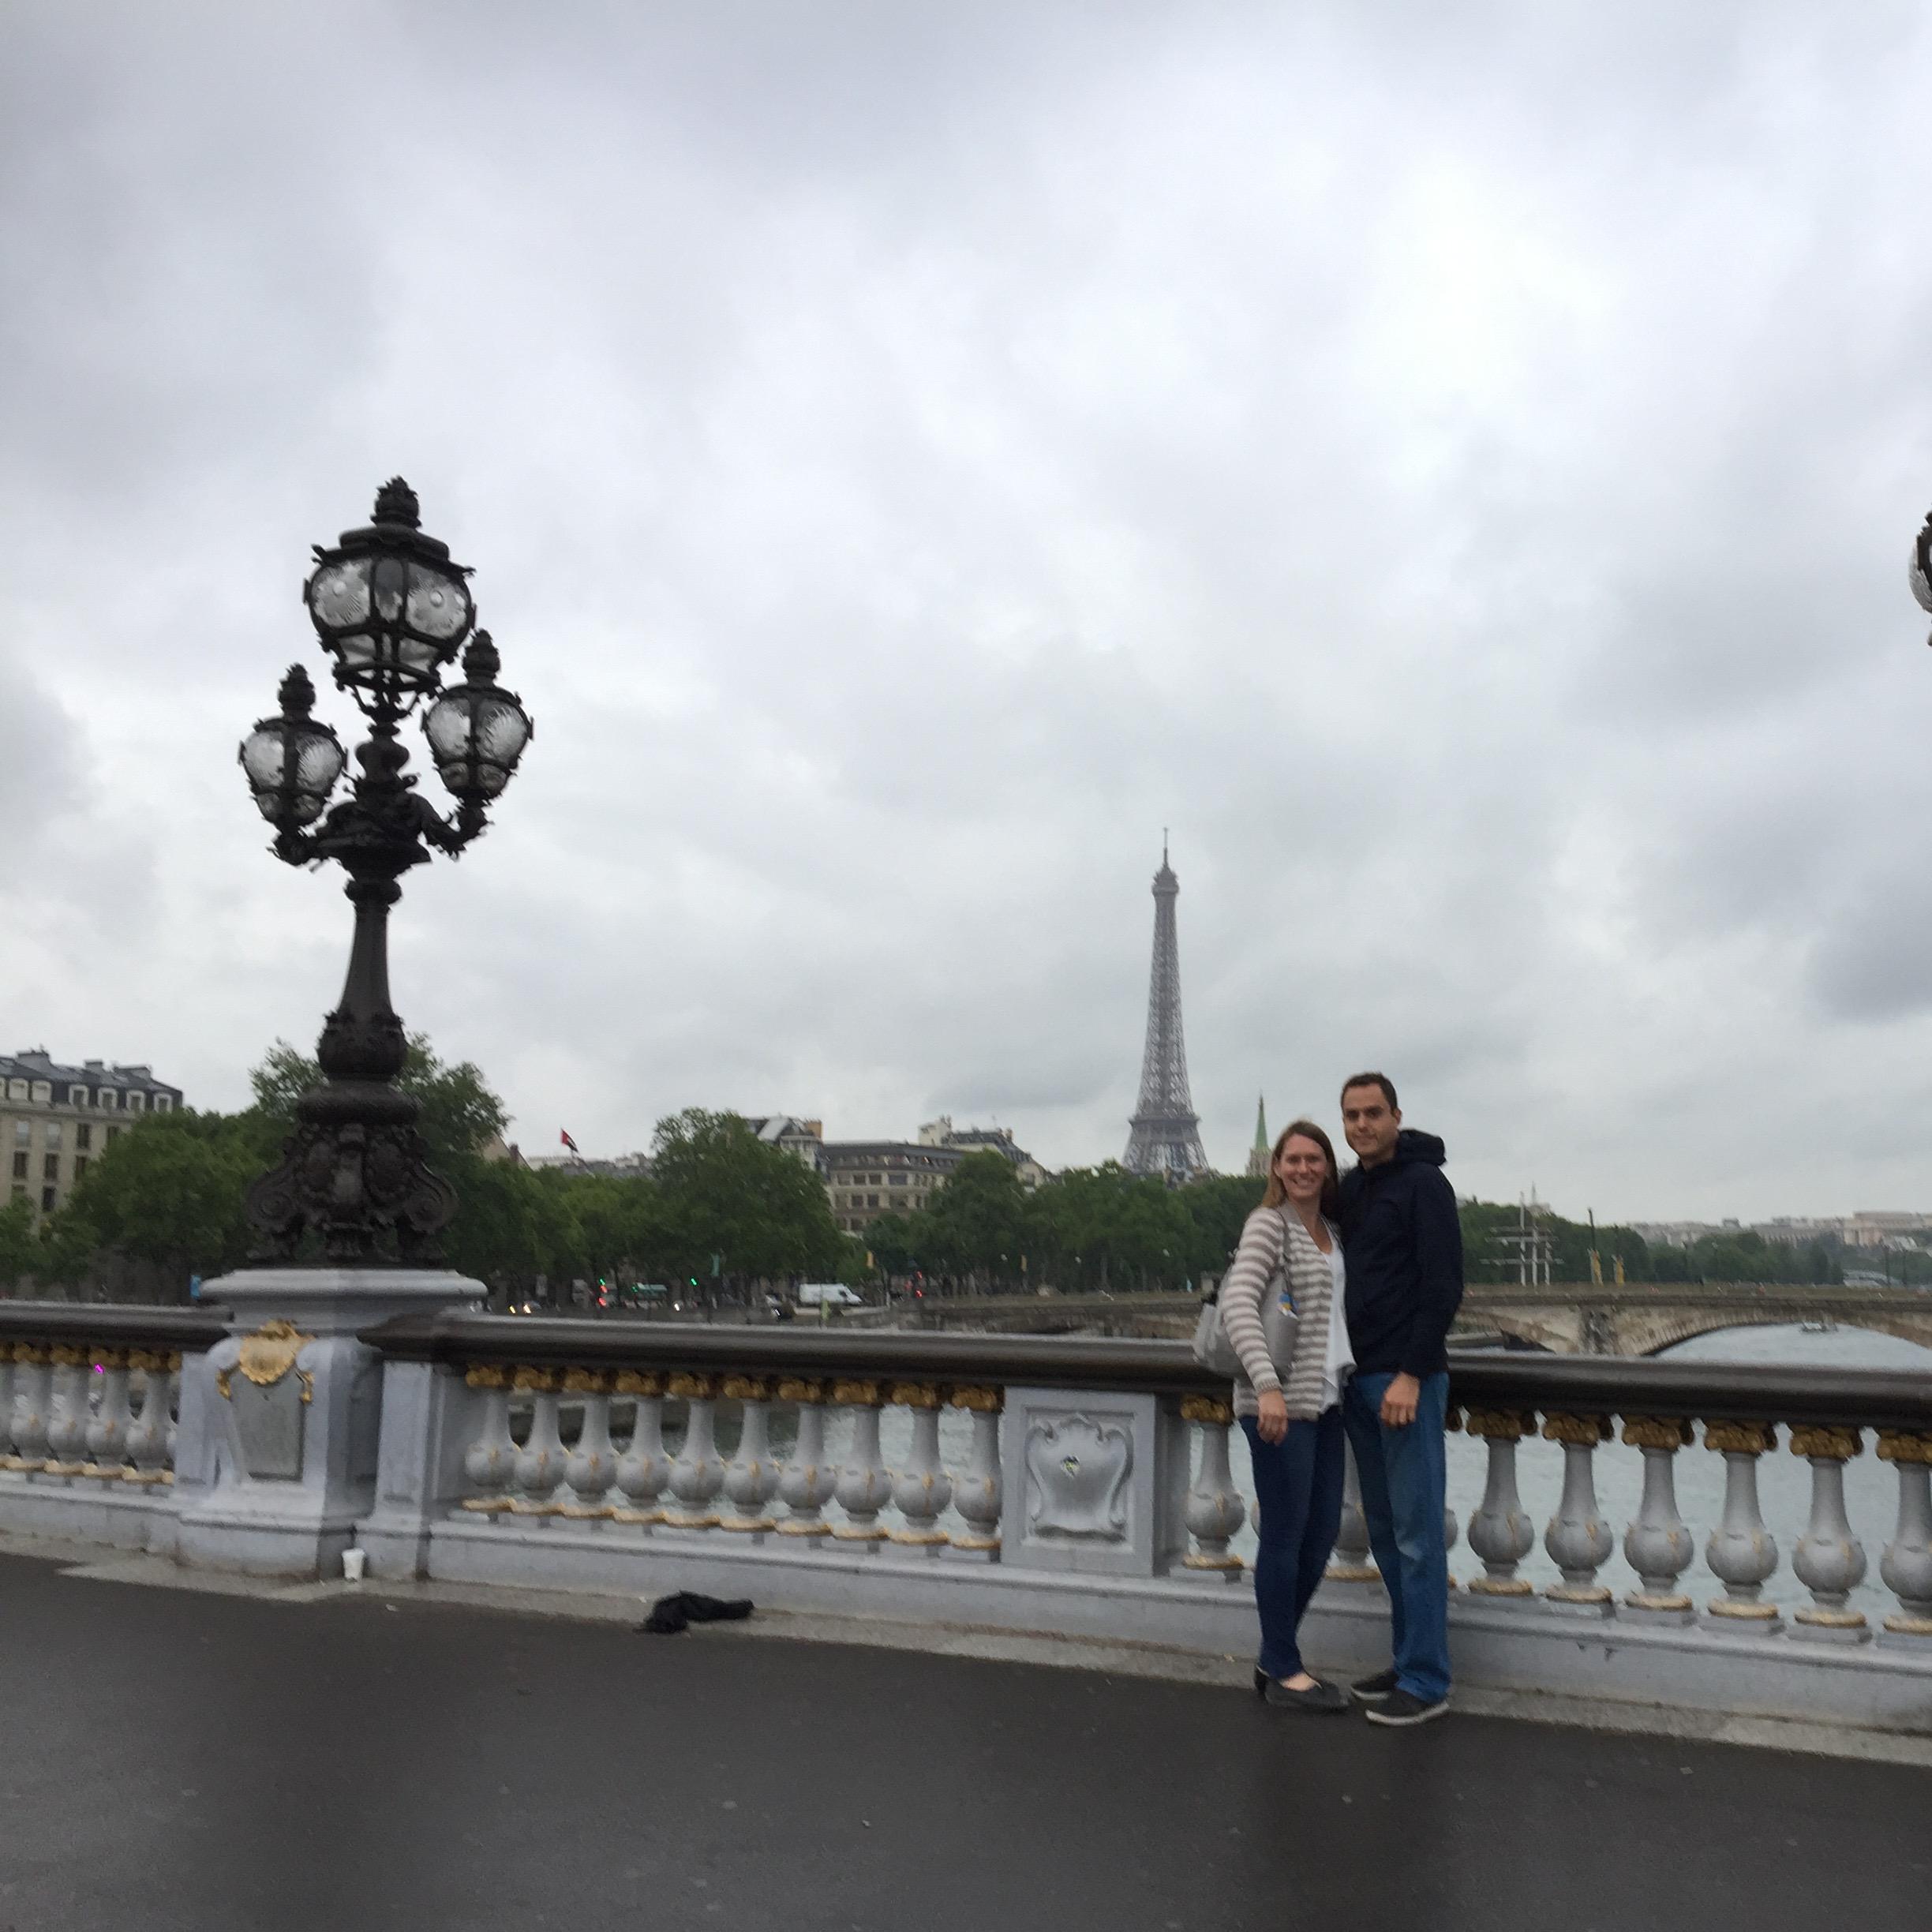 Our first International Trip together
France, May 2017